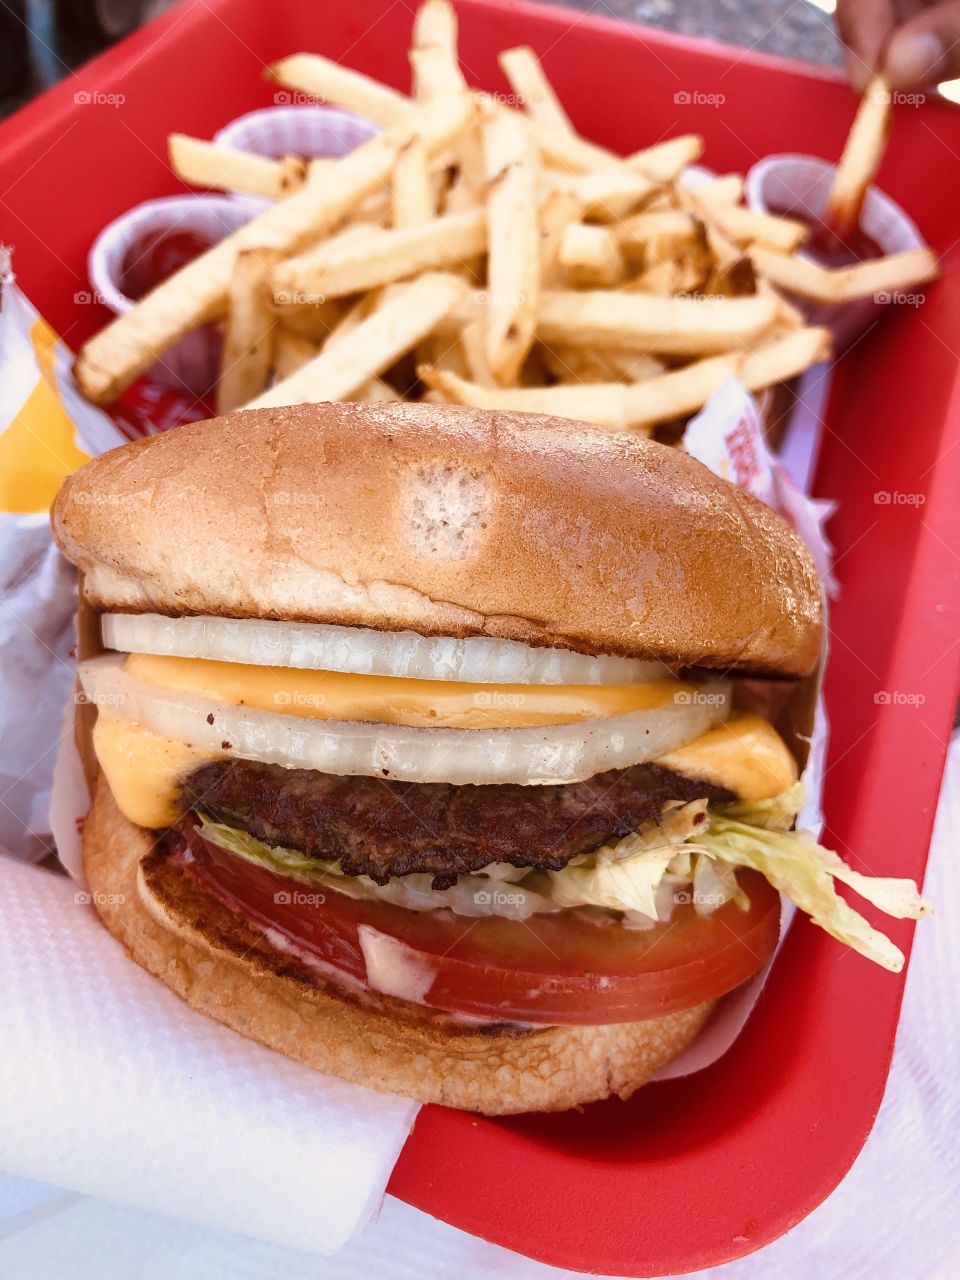 Delicious In N’ Out Burger With Fries, Classic Hamburger, Original Fresh Burgers, Fast Food Delight, Delicious Food 